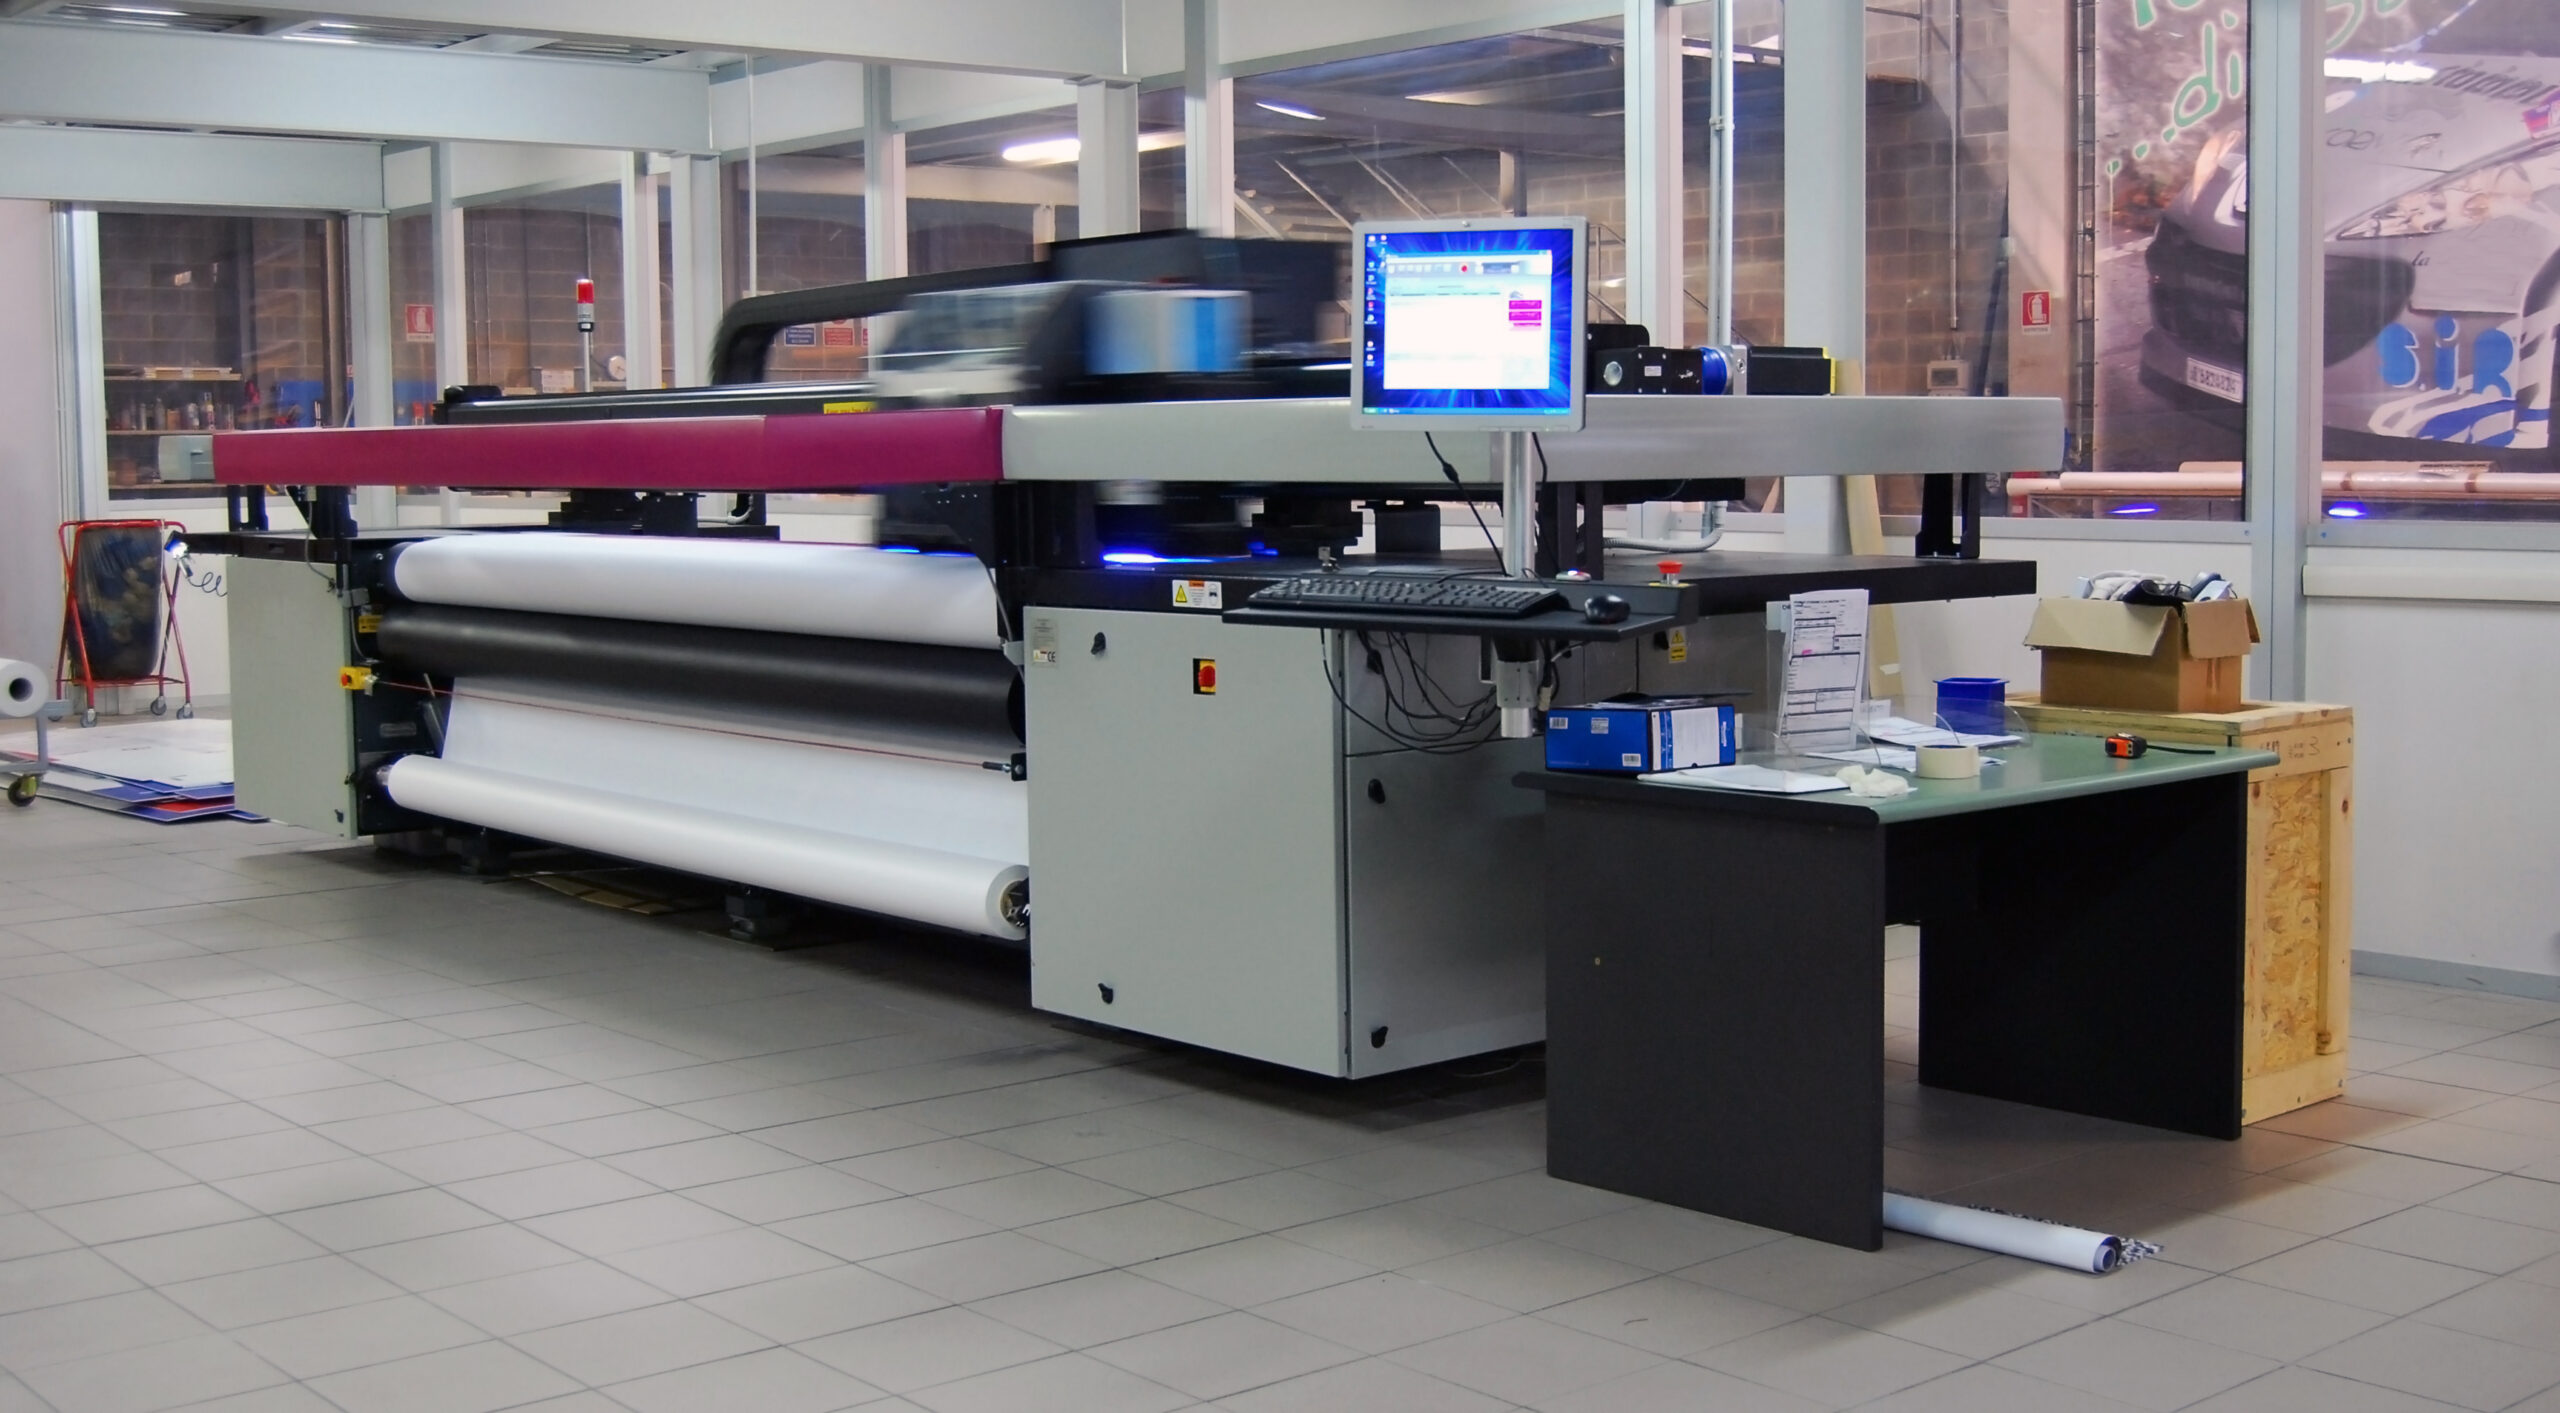 Digital printing system for printing a wide range of superwide-format applications. These printers are generally roll-to-roll and have a print bed that is 2m to 5m wide. Mostly used for printing billboards and generally have the capability of printing between 60 to 160 square metres per hour.